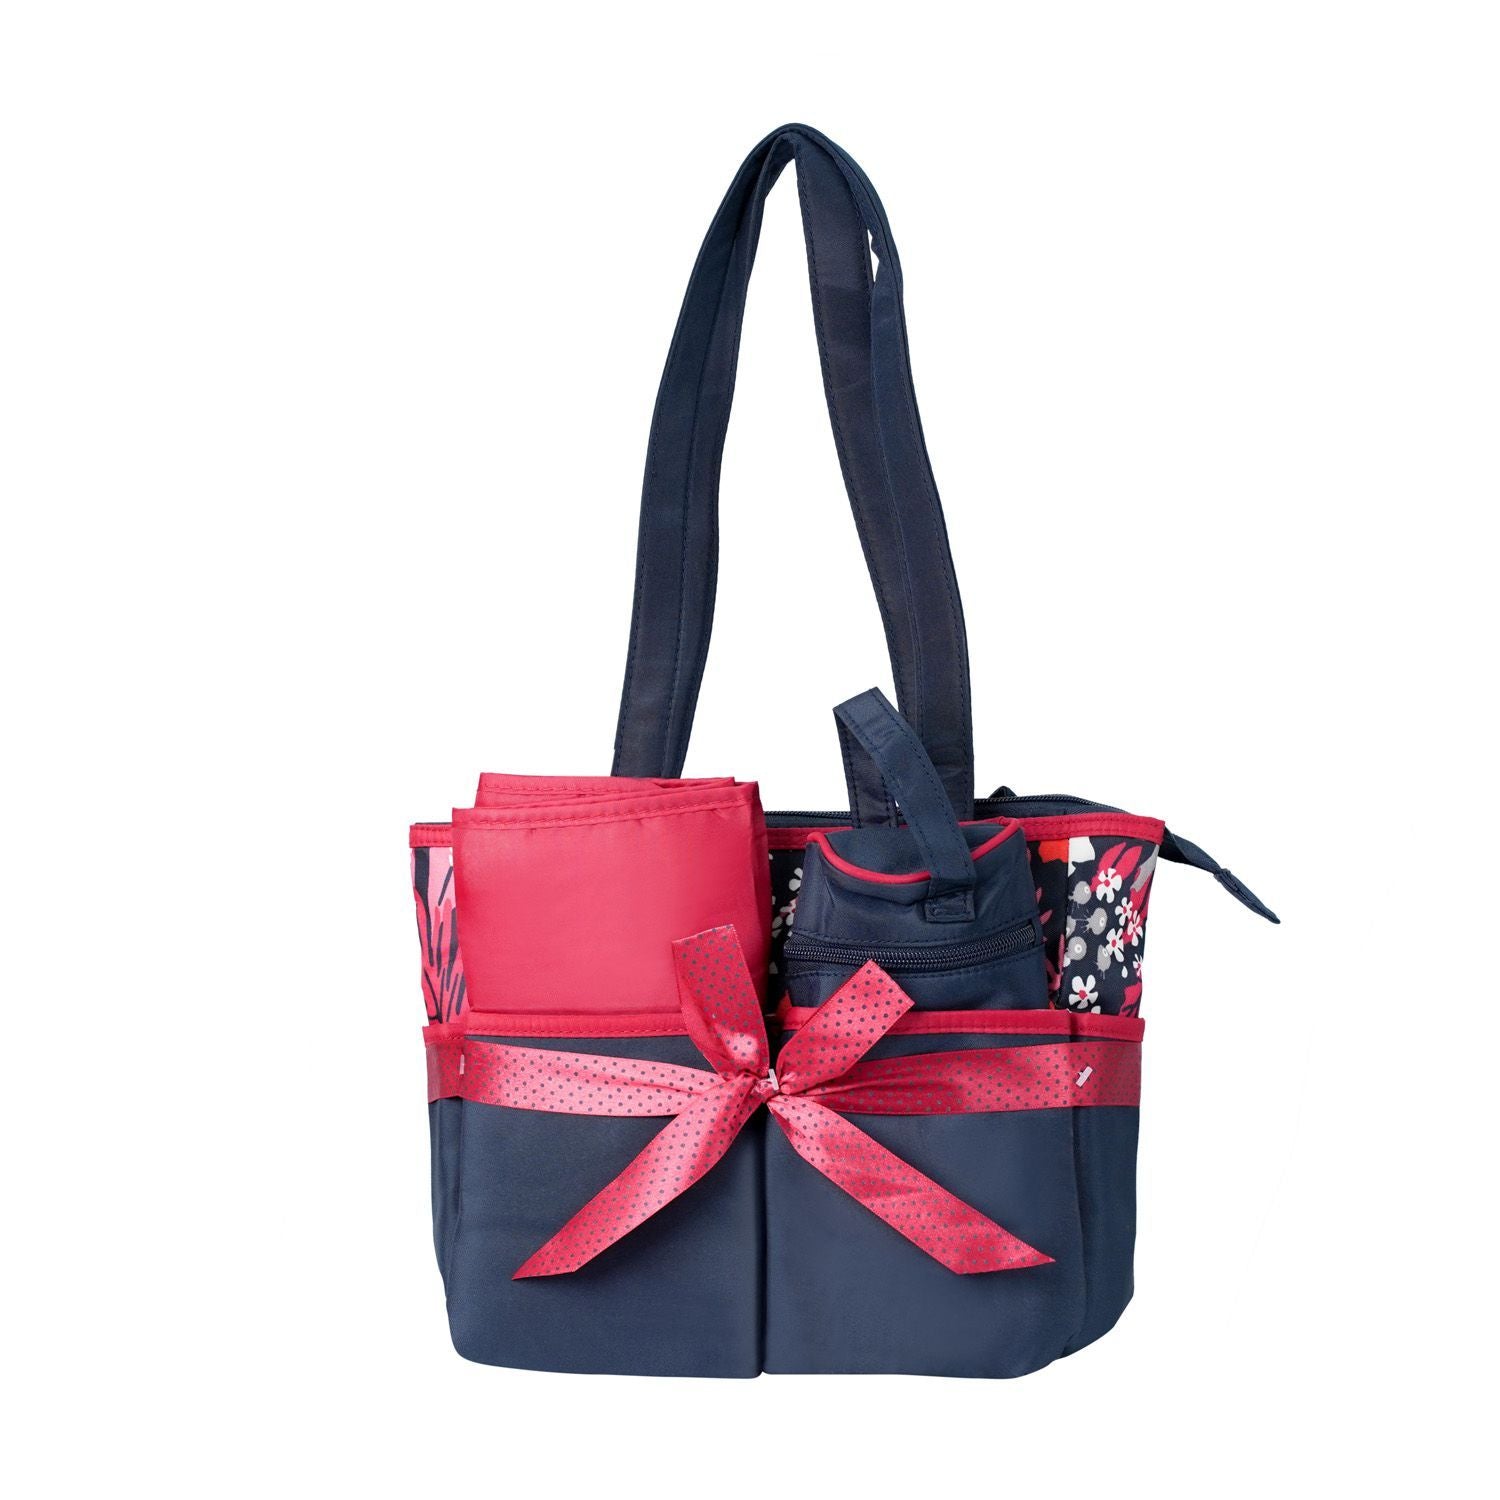 Buy Colorland 2 in 1 Mother Diaper Bag in Rose Red in Pakistan - BB999FF